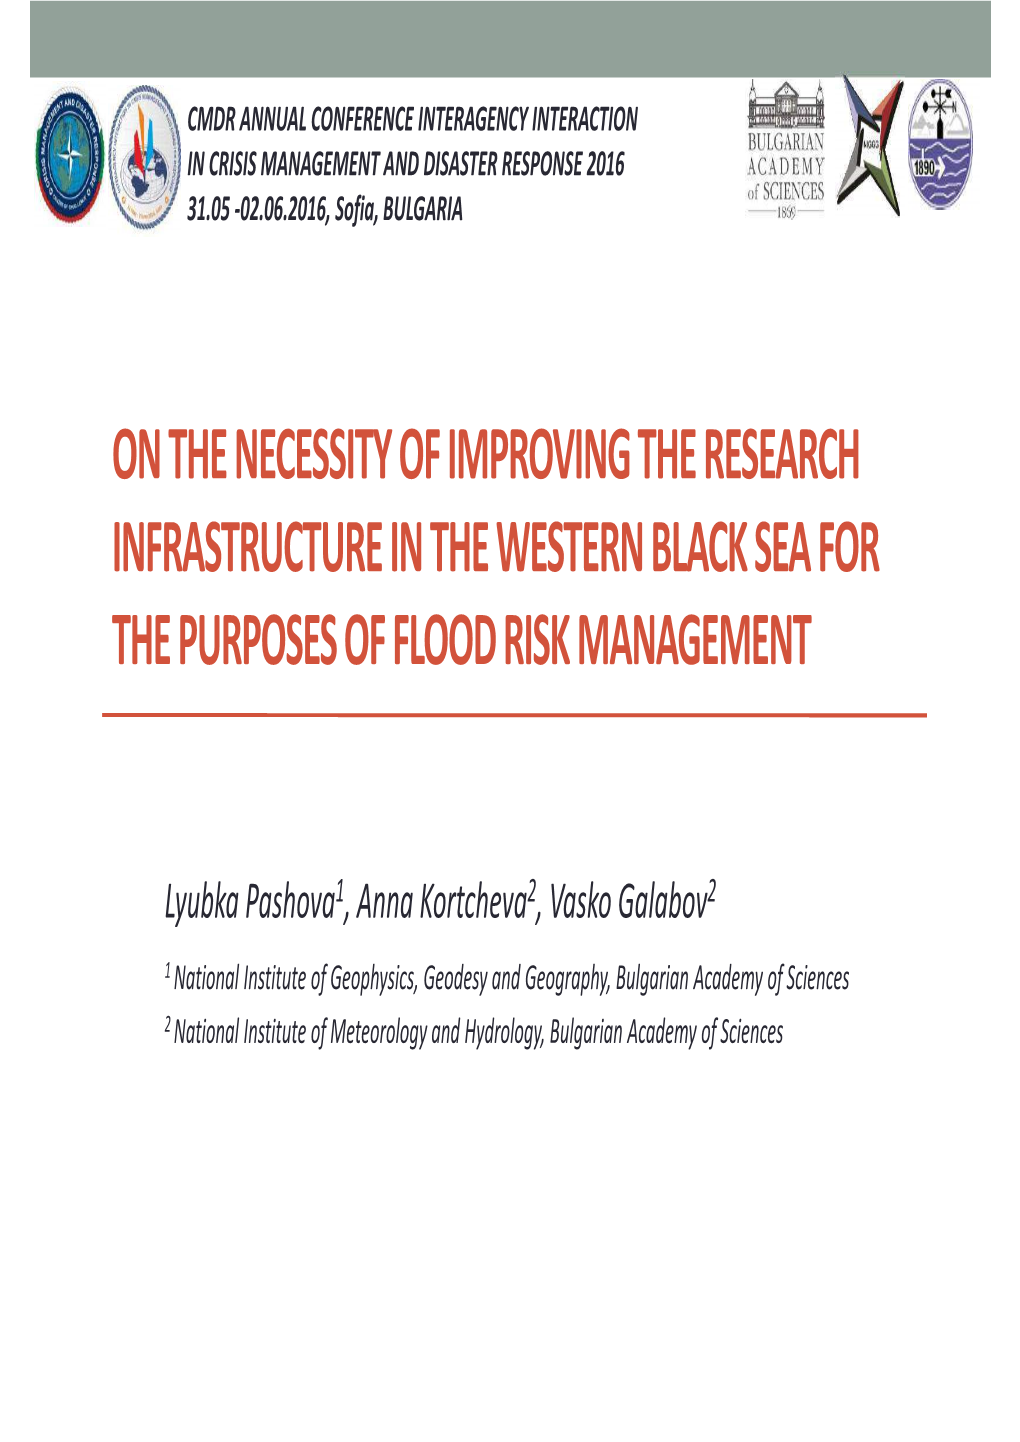 On the Necessity of Improving the Research Infrastructure in the Western Black Sea for the Purposes of Flood Risk Management